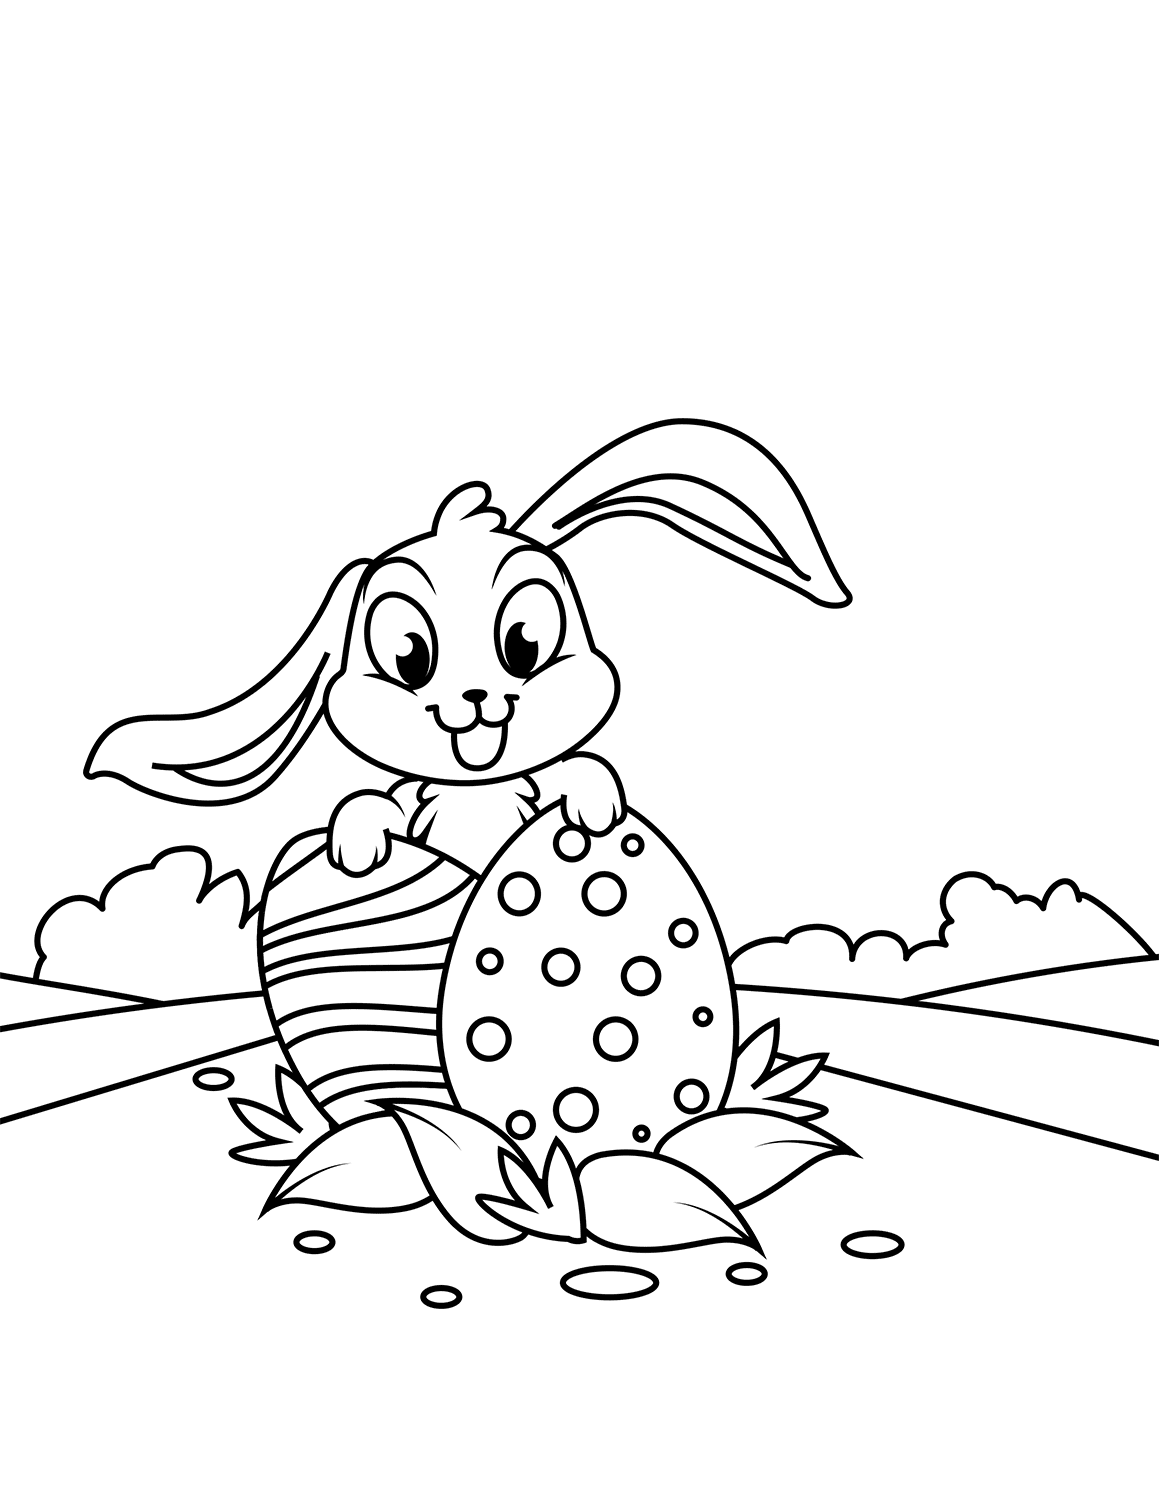 Cute Bunny With Two Easter Eggs Coloring Page